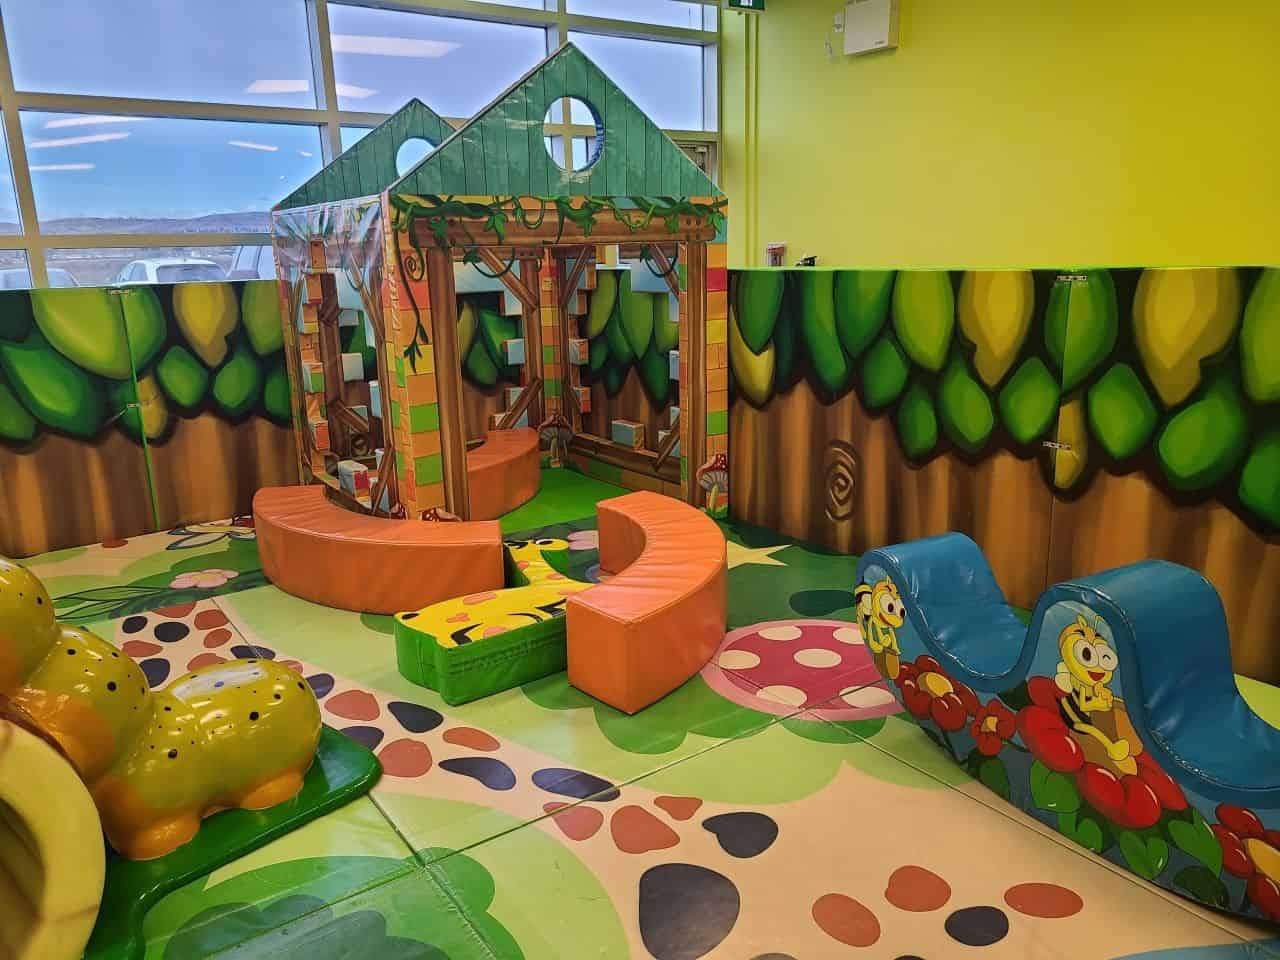 Play areas at the Treehouse Indoor Playground South Calgary